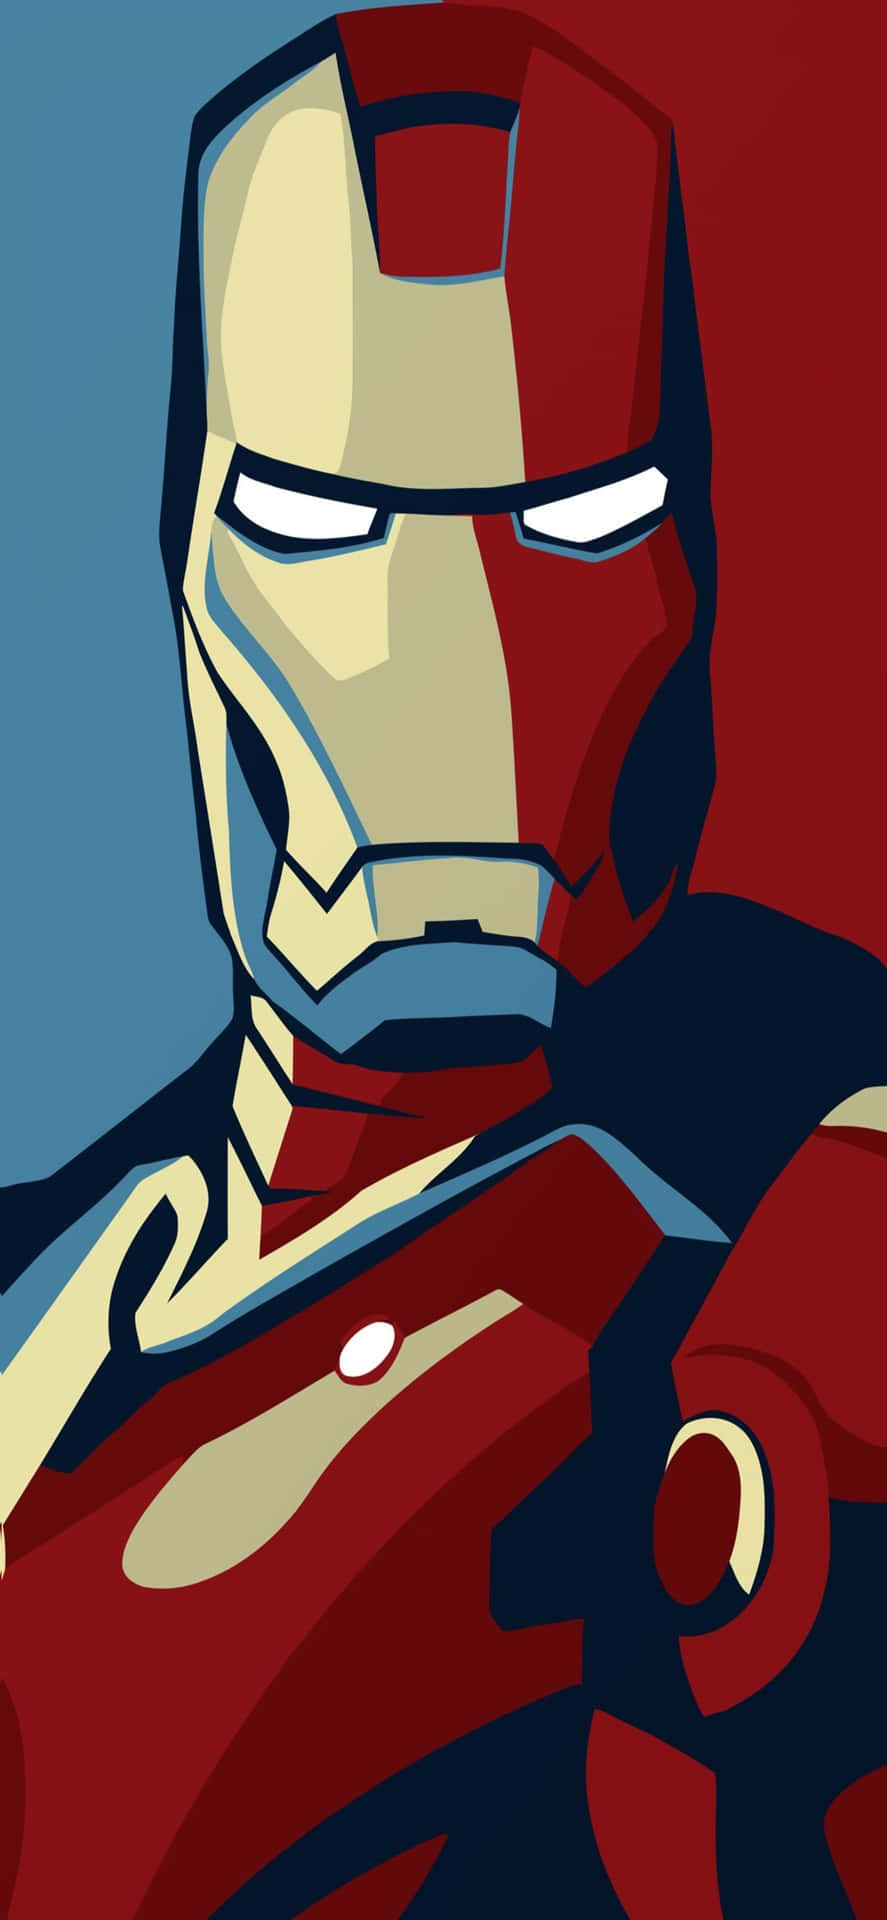 Iphone X Iron Man Background Blue And Red Edit